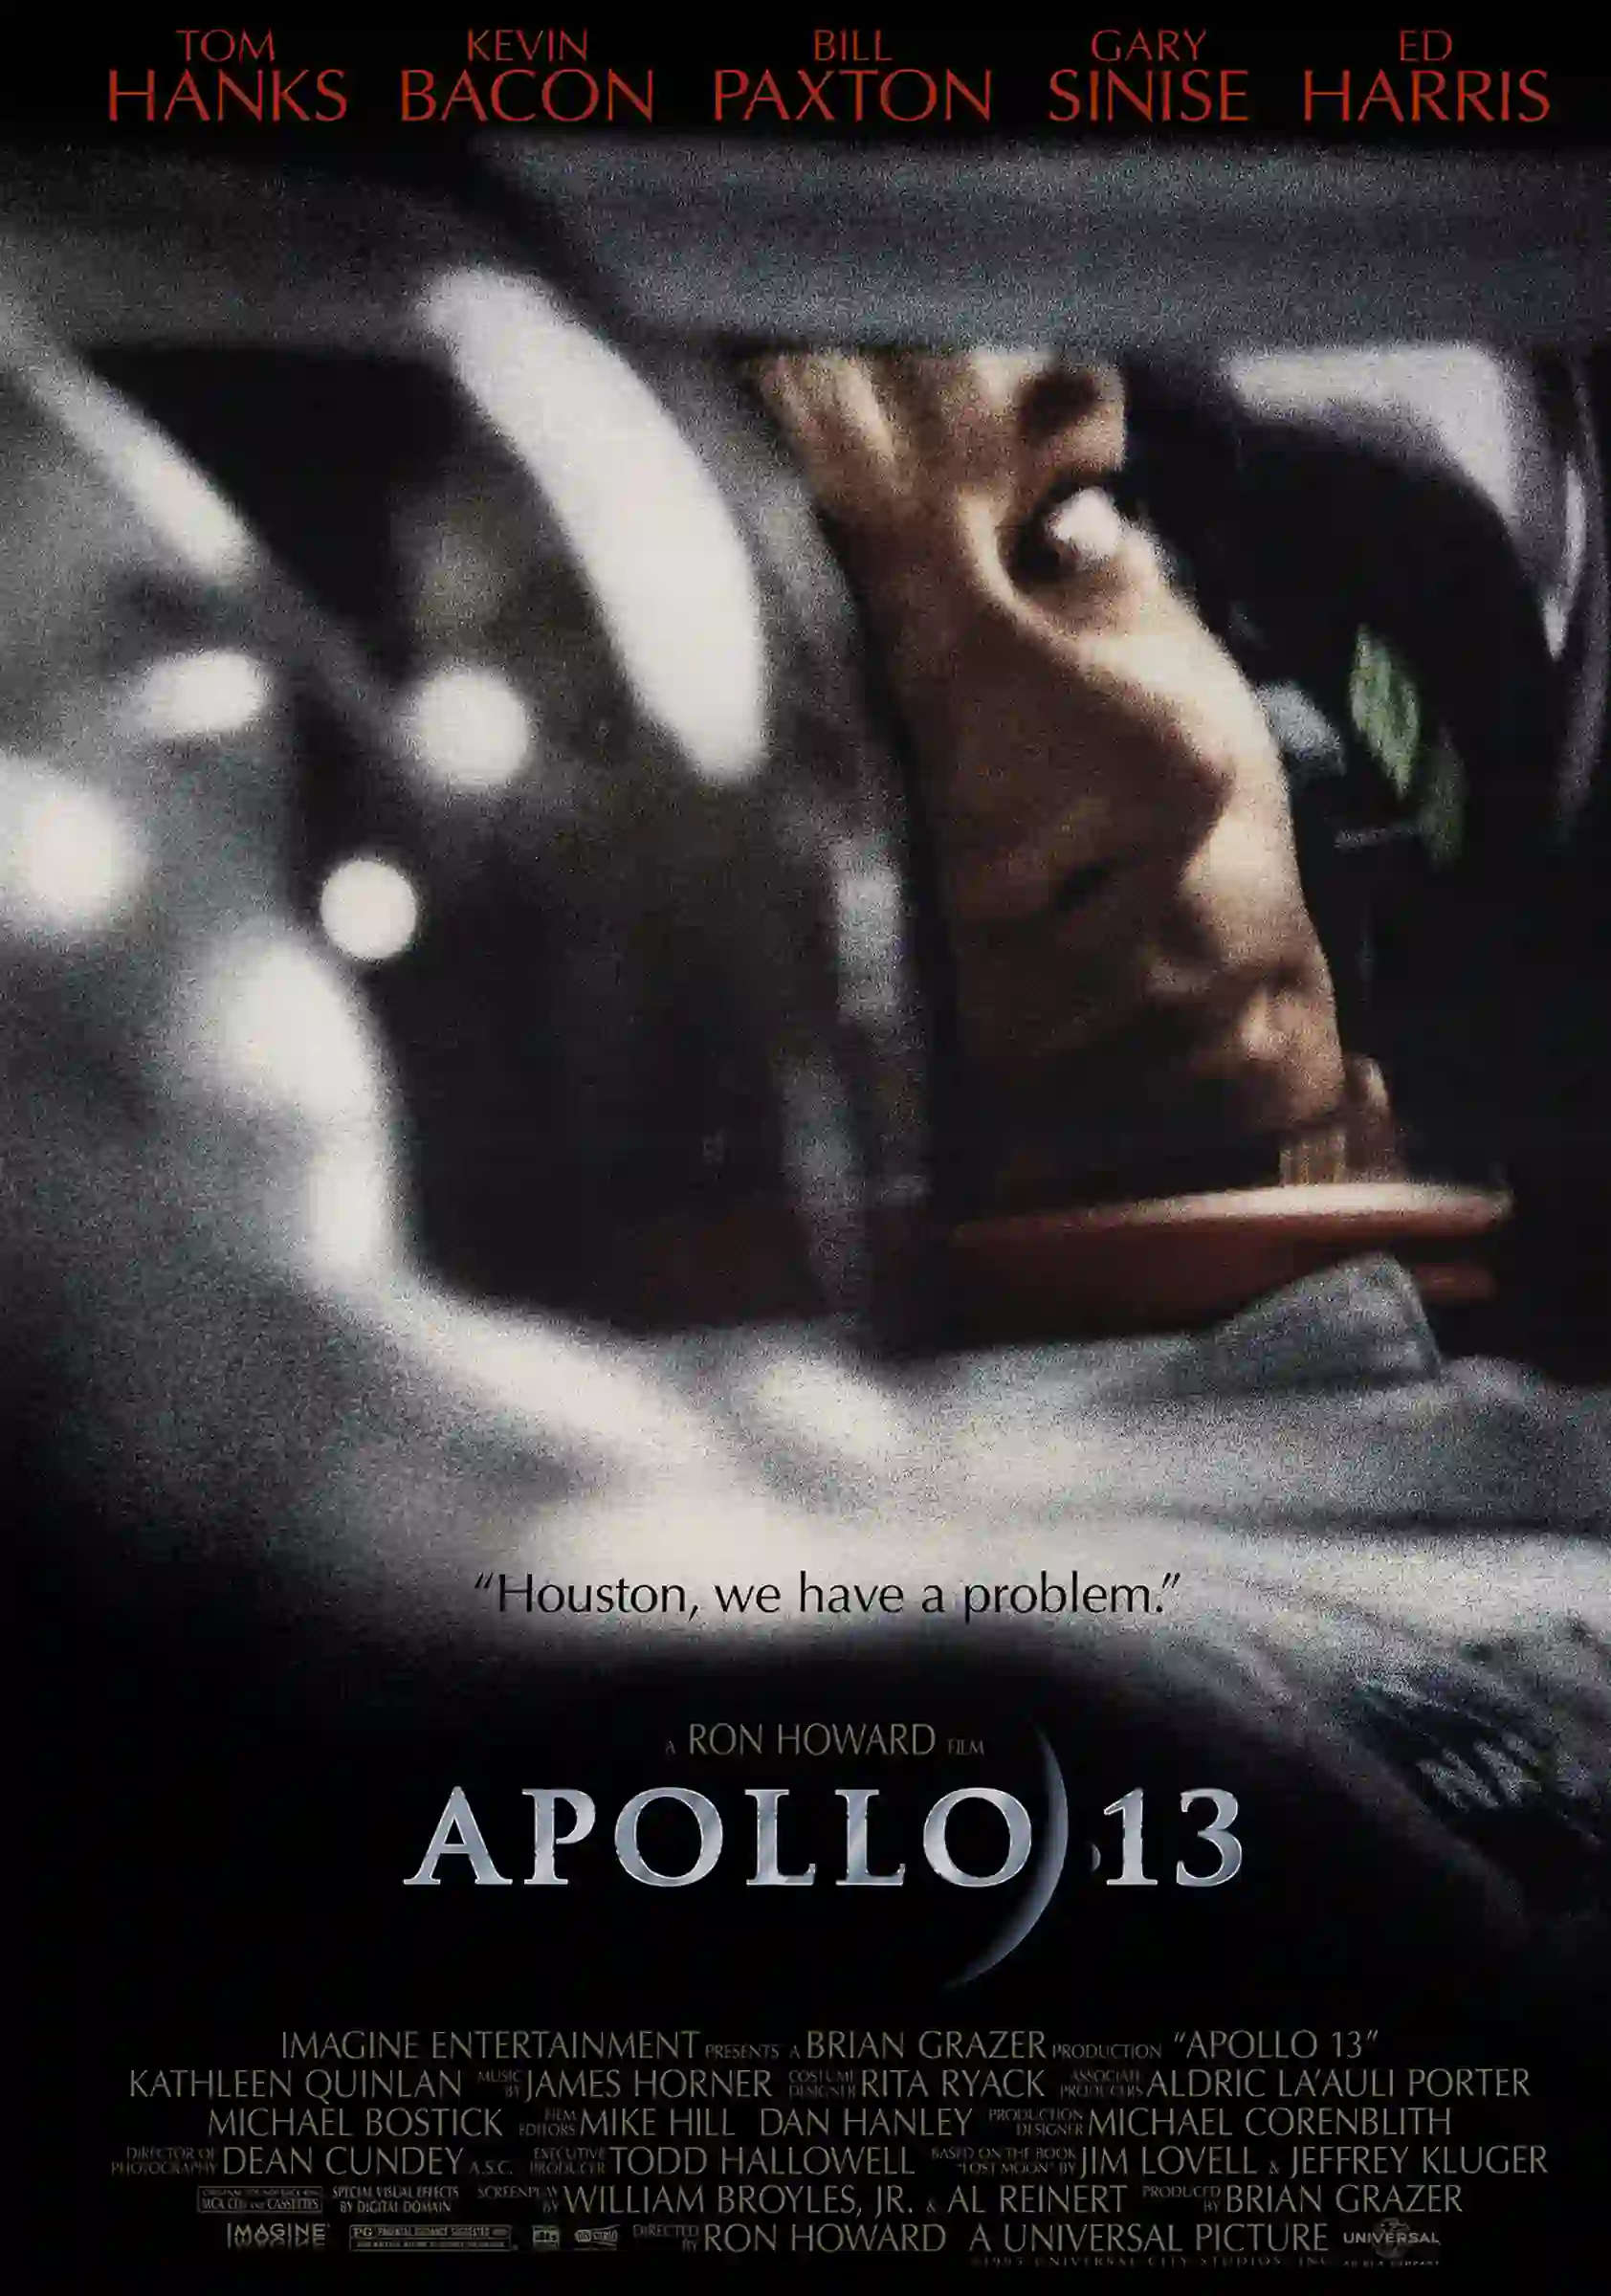 Apollo 13 movie poster for HR leaders